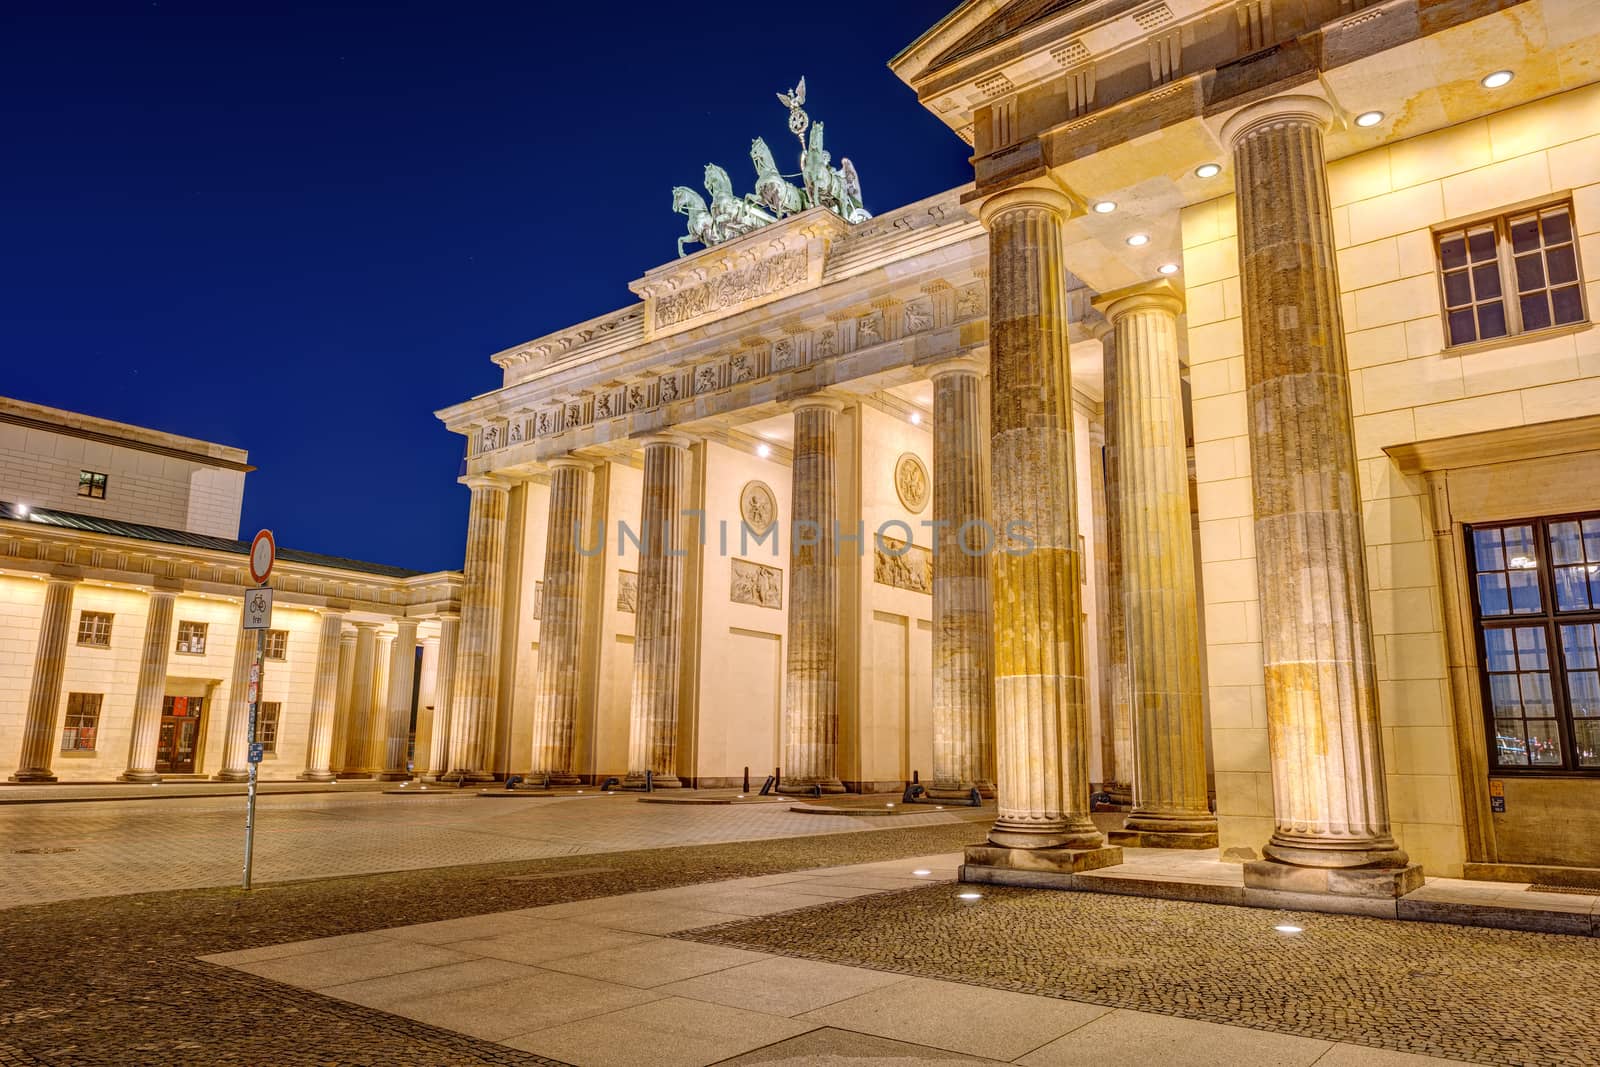 Lateral view of the illuminated Brandenburger Tor in Berlin at night